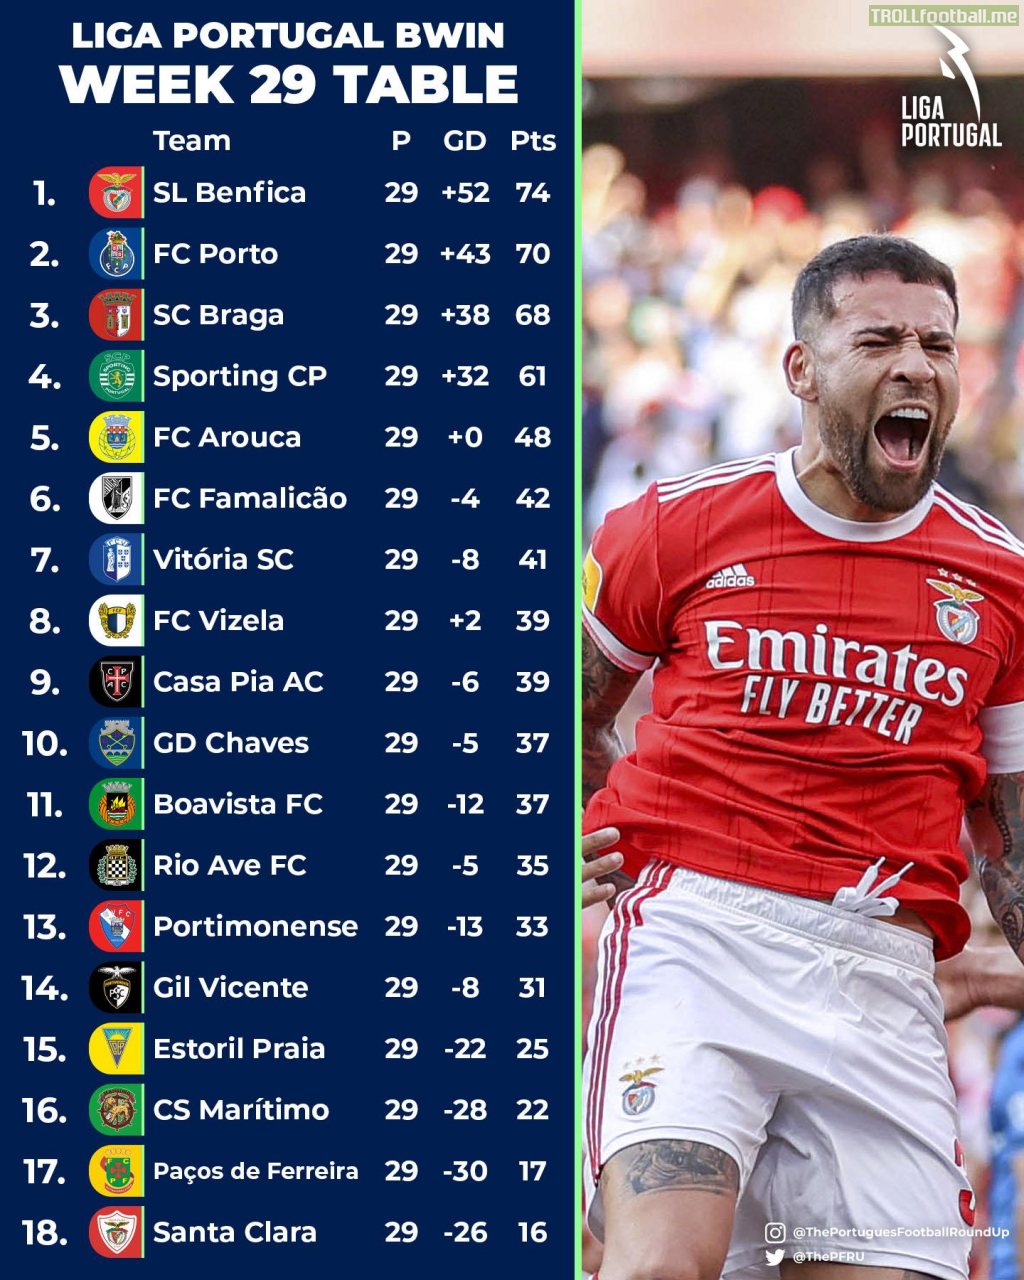 The Liga Portugal league table after Matchday 29